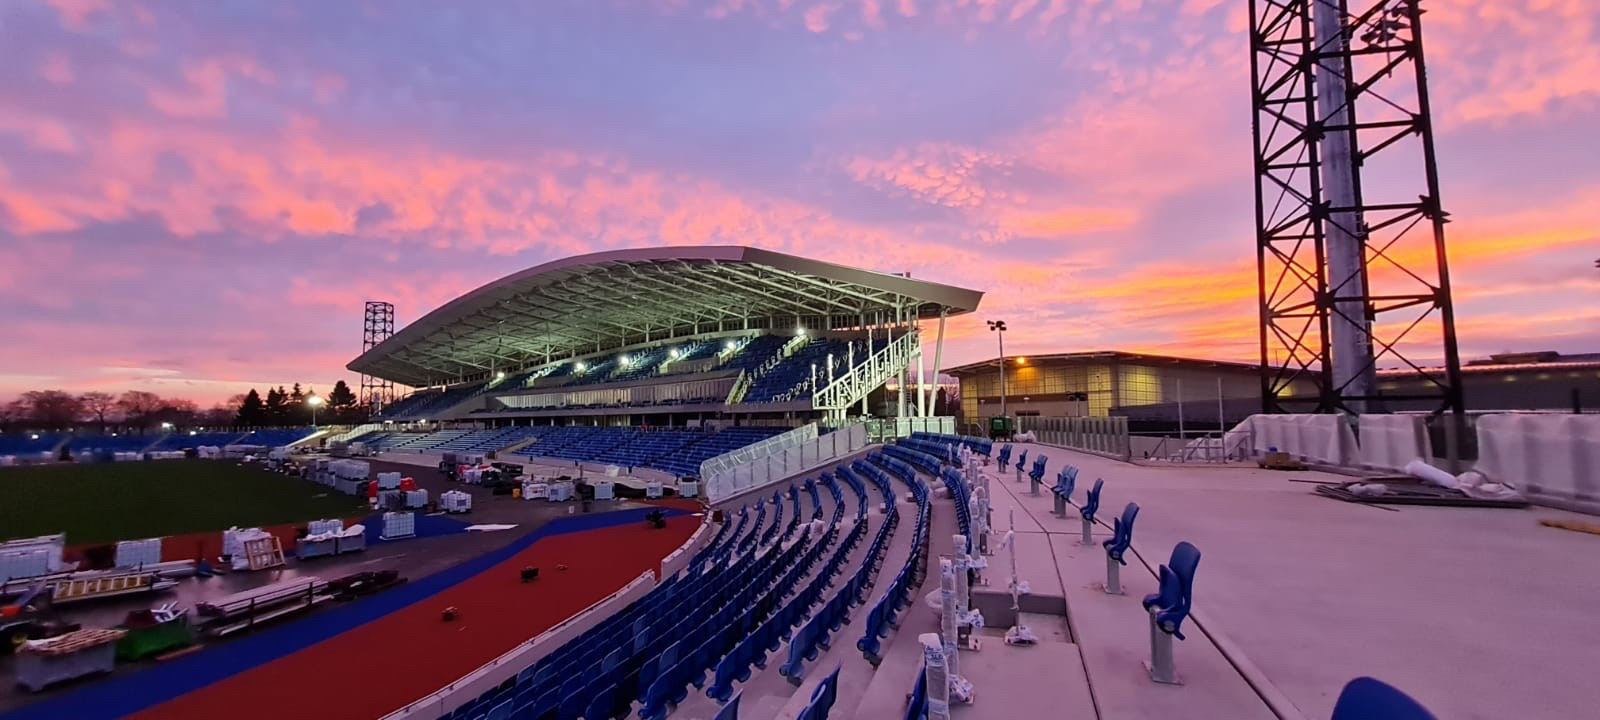 The Alexander Stadium, the main venue for the Birmingham 2022 Commonwealth Games, is based in the Perry Barr area and is being renovated and expanded ©Birmingham City Council.